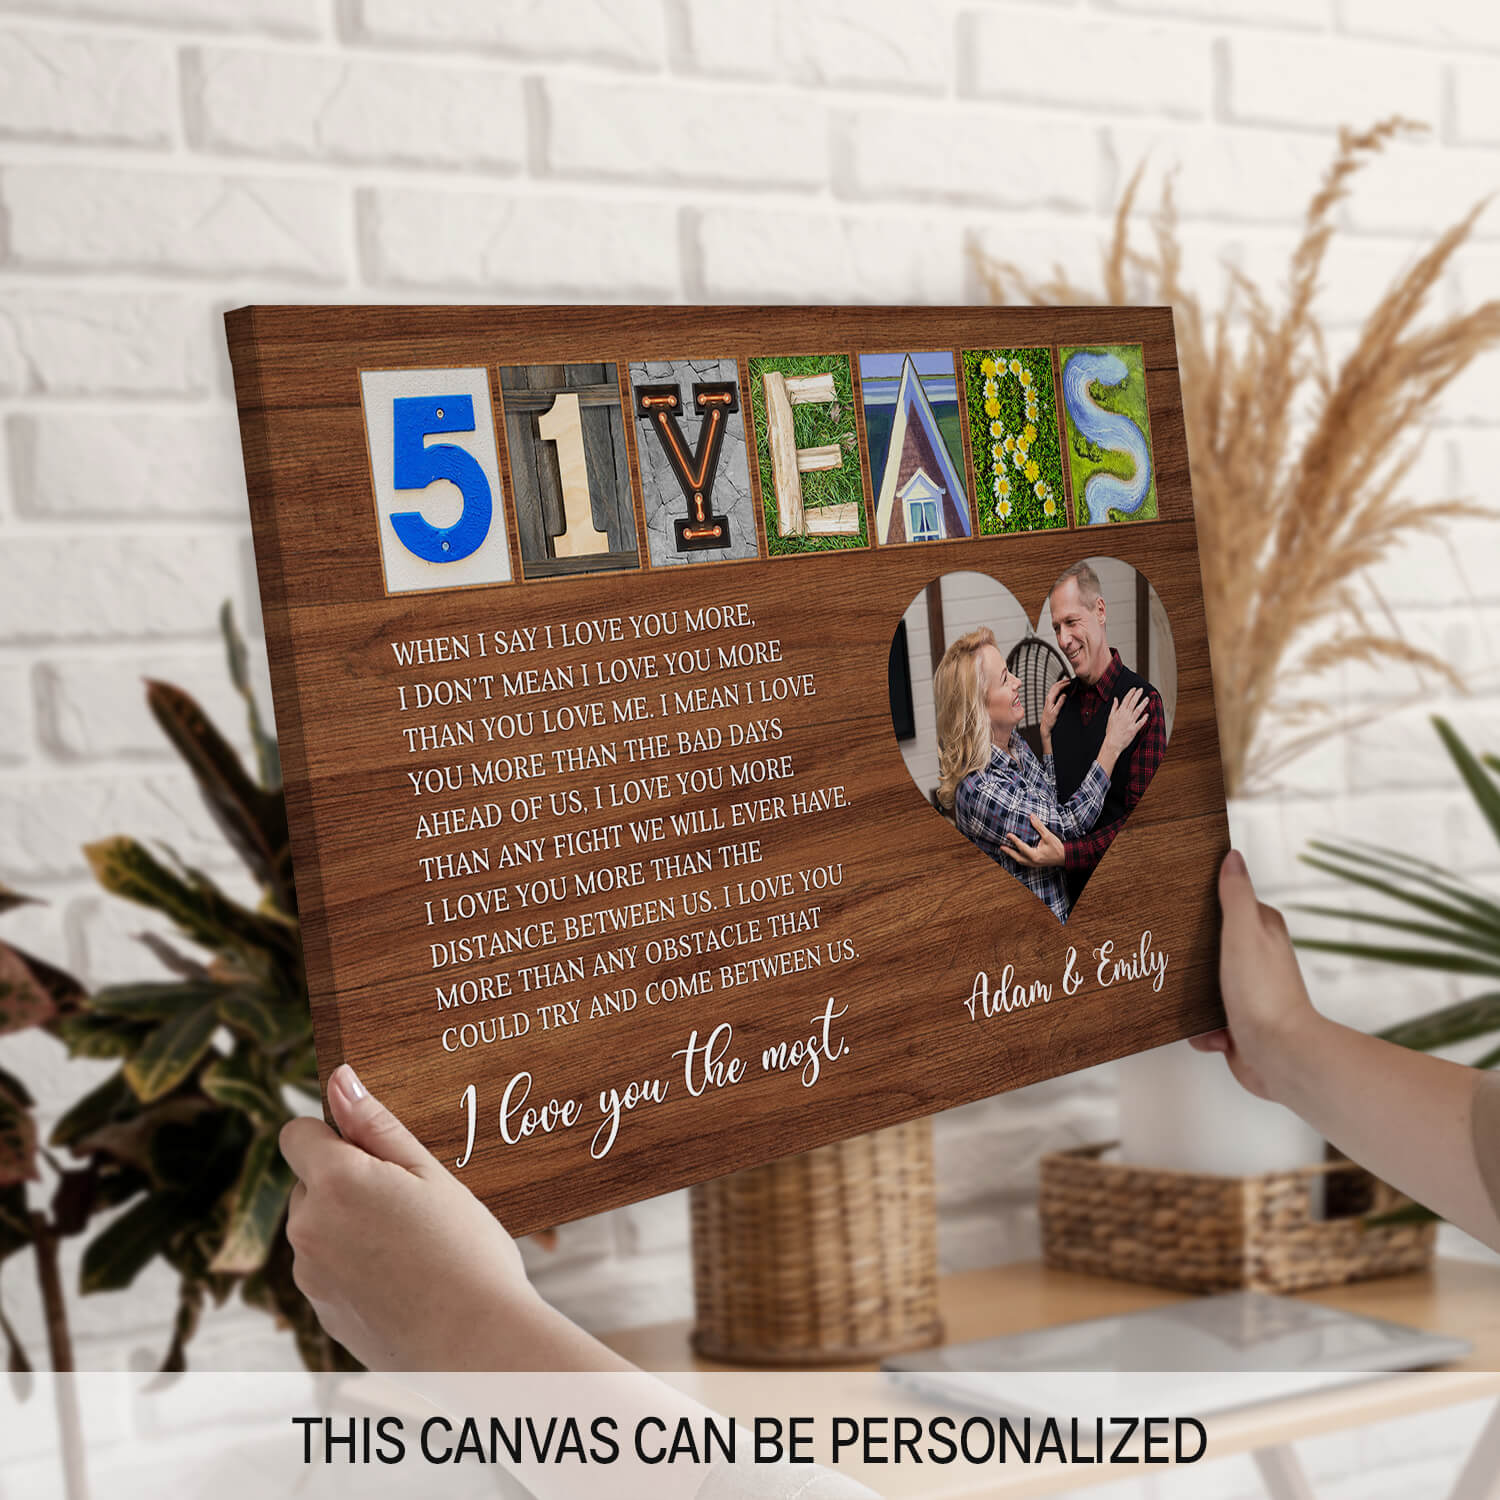 51 Years - Personalized 51 Year Anniversary gift For Husband or Wife - Custom Canvas Print - MyMindfulGifts